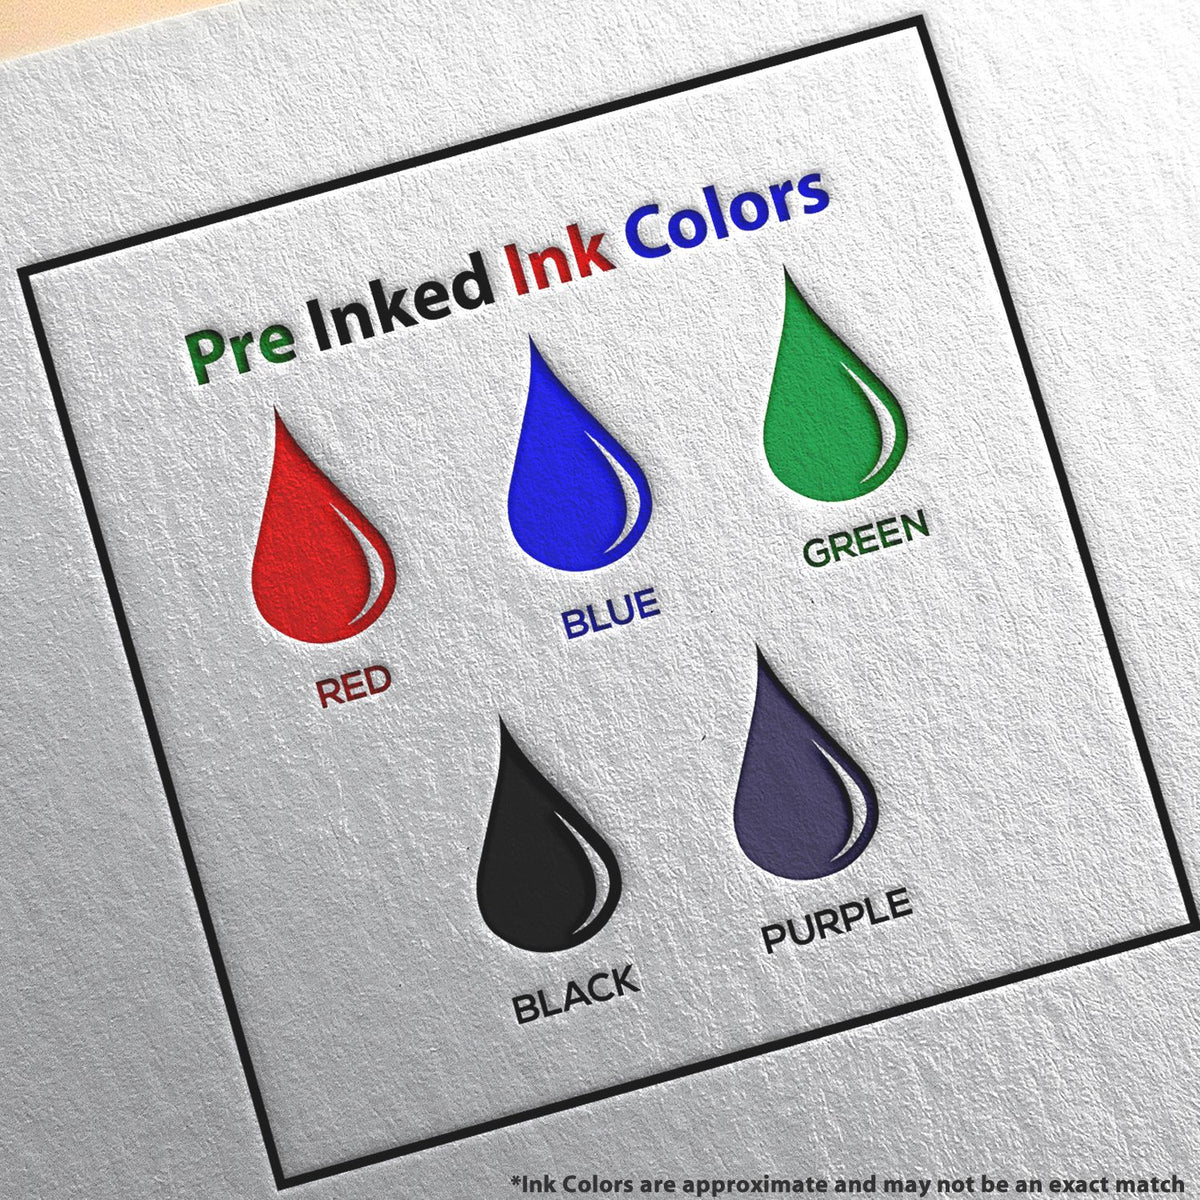 A picture showing the different ink colors or hues available for the MaxLight Premium Pre-Inked Idaho Rectangular Notarial Stamp product.